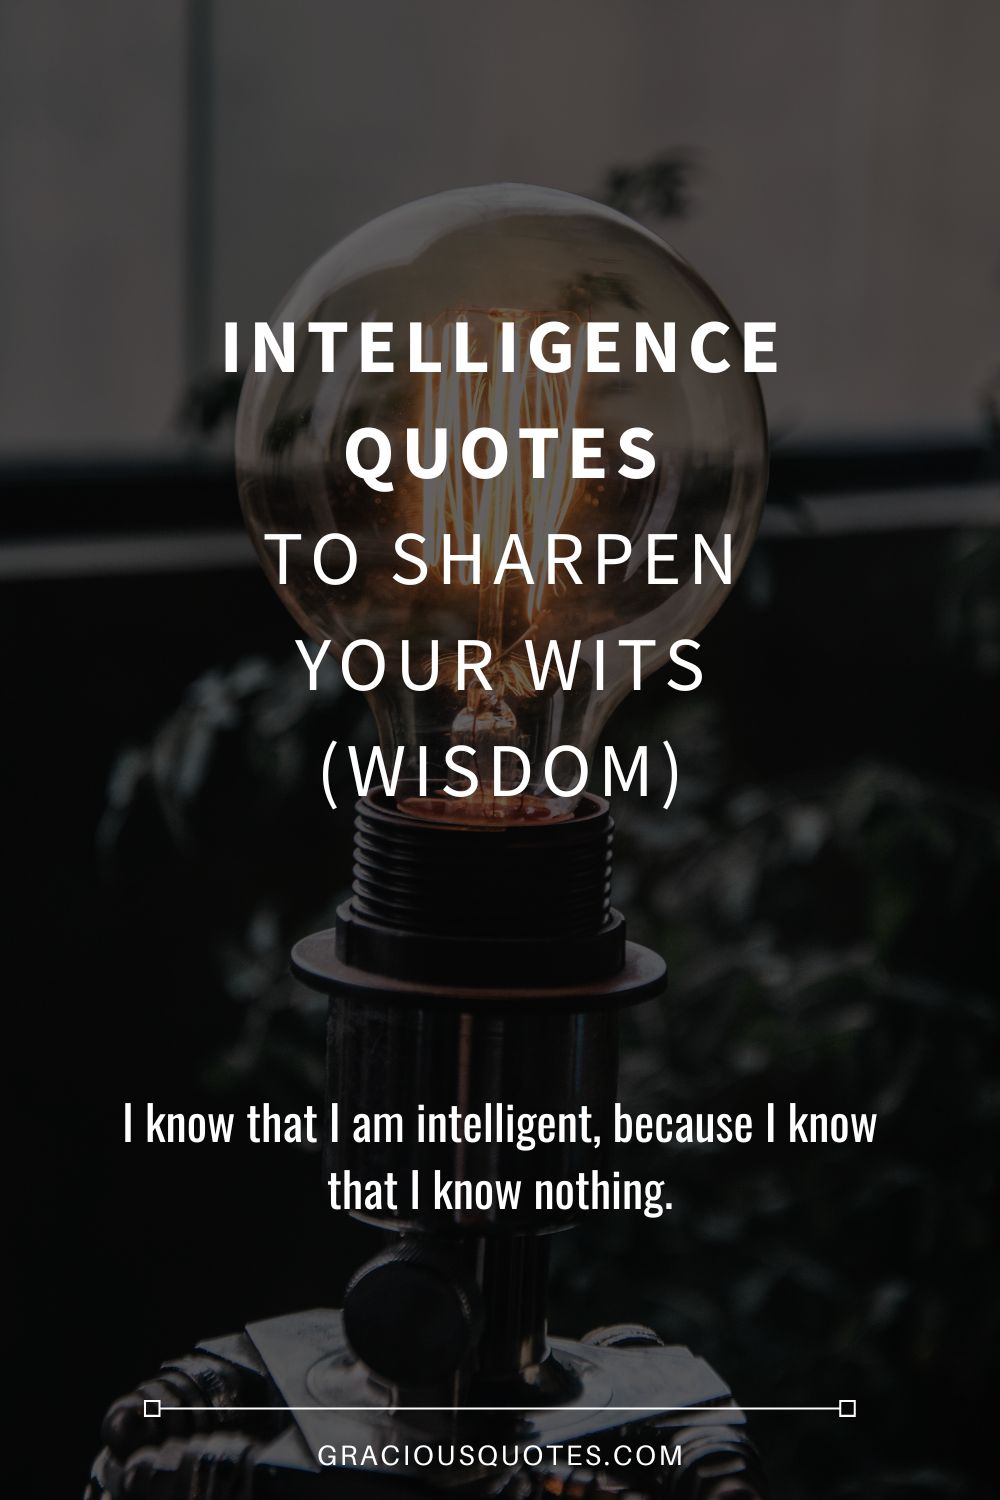 Intelligence Quotes to Sharpen Your Wits (WISDOM) - Gracious Quotes